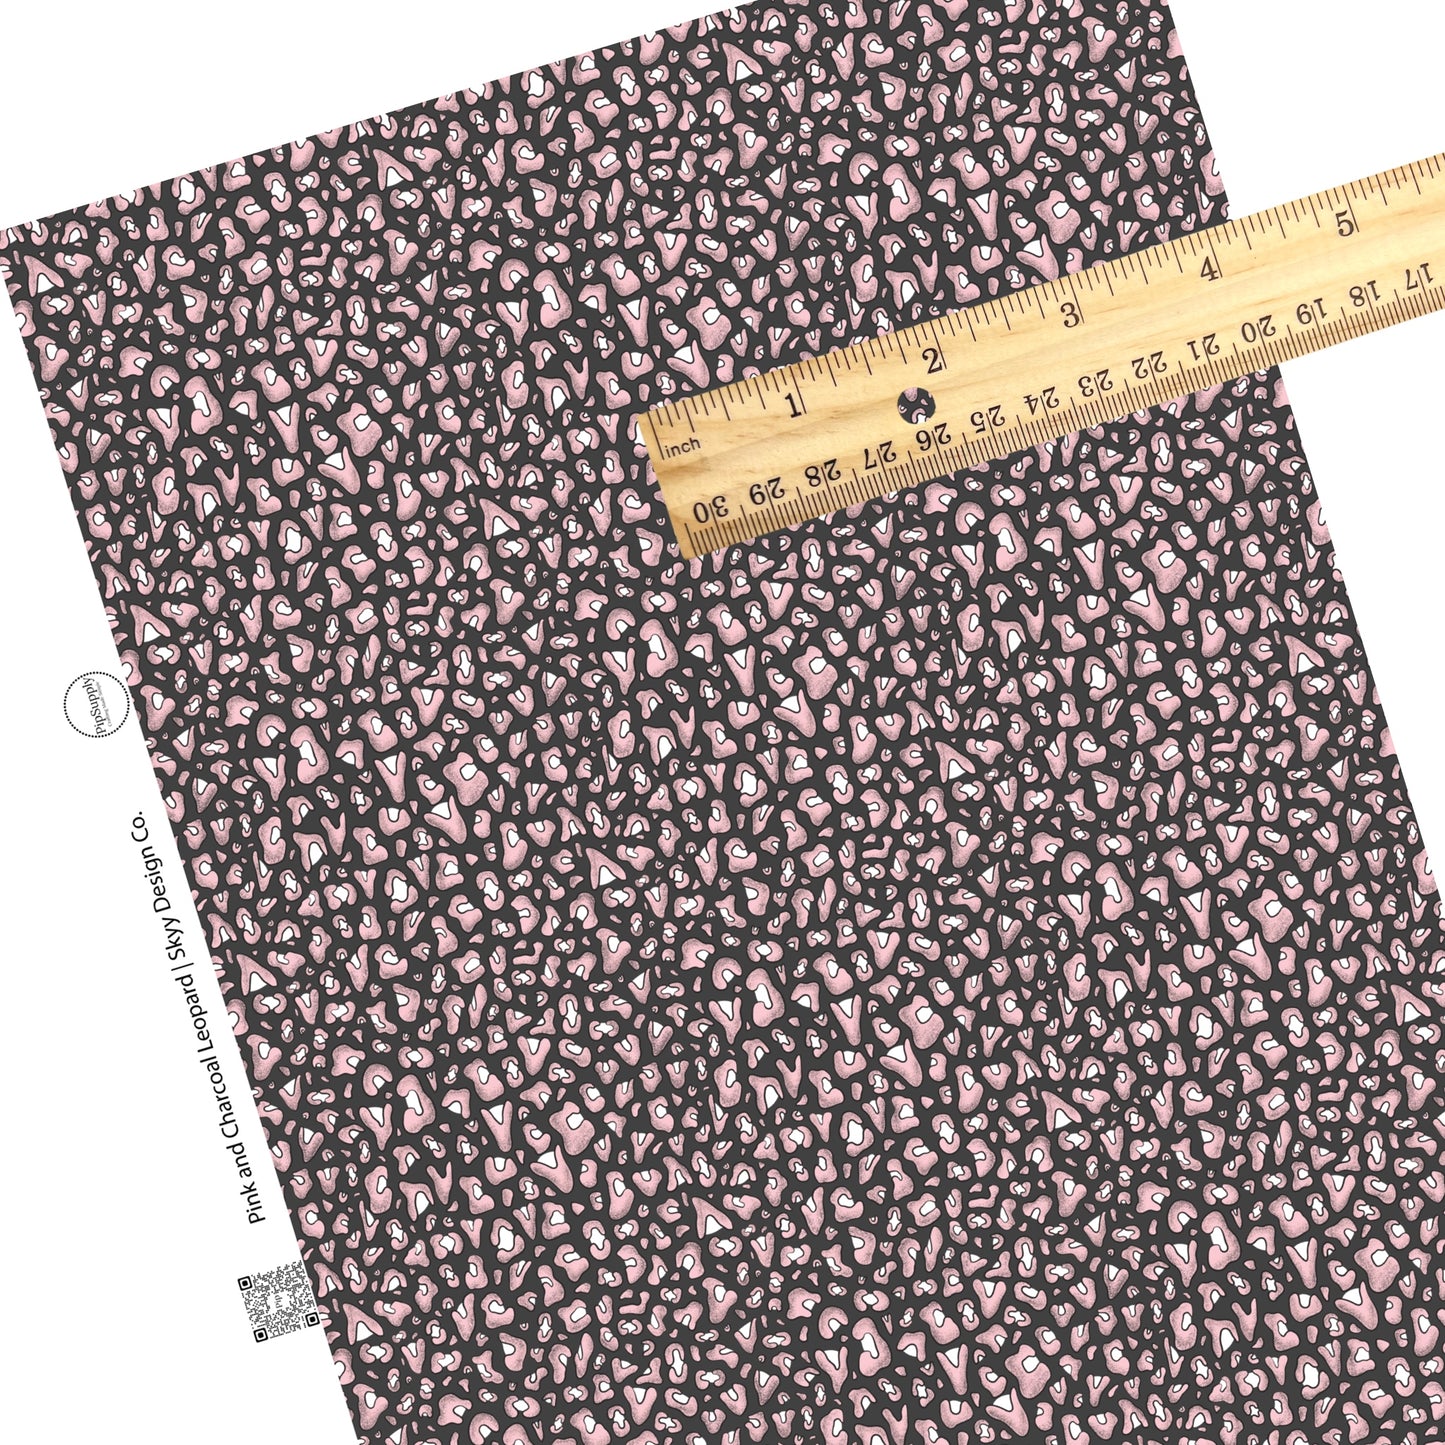 Scattered pink leopard print on charcoal faux leather sheets